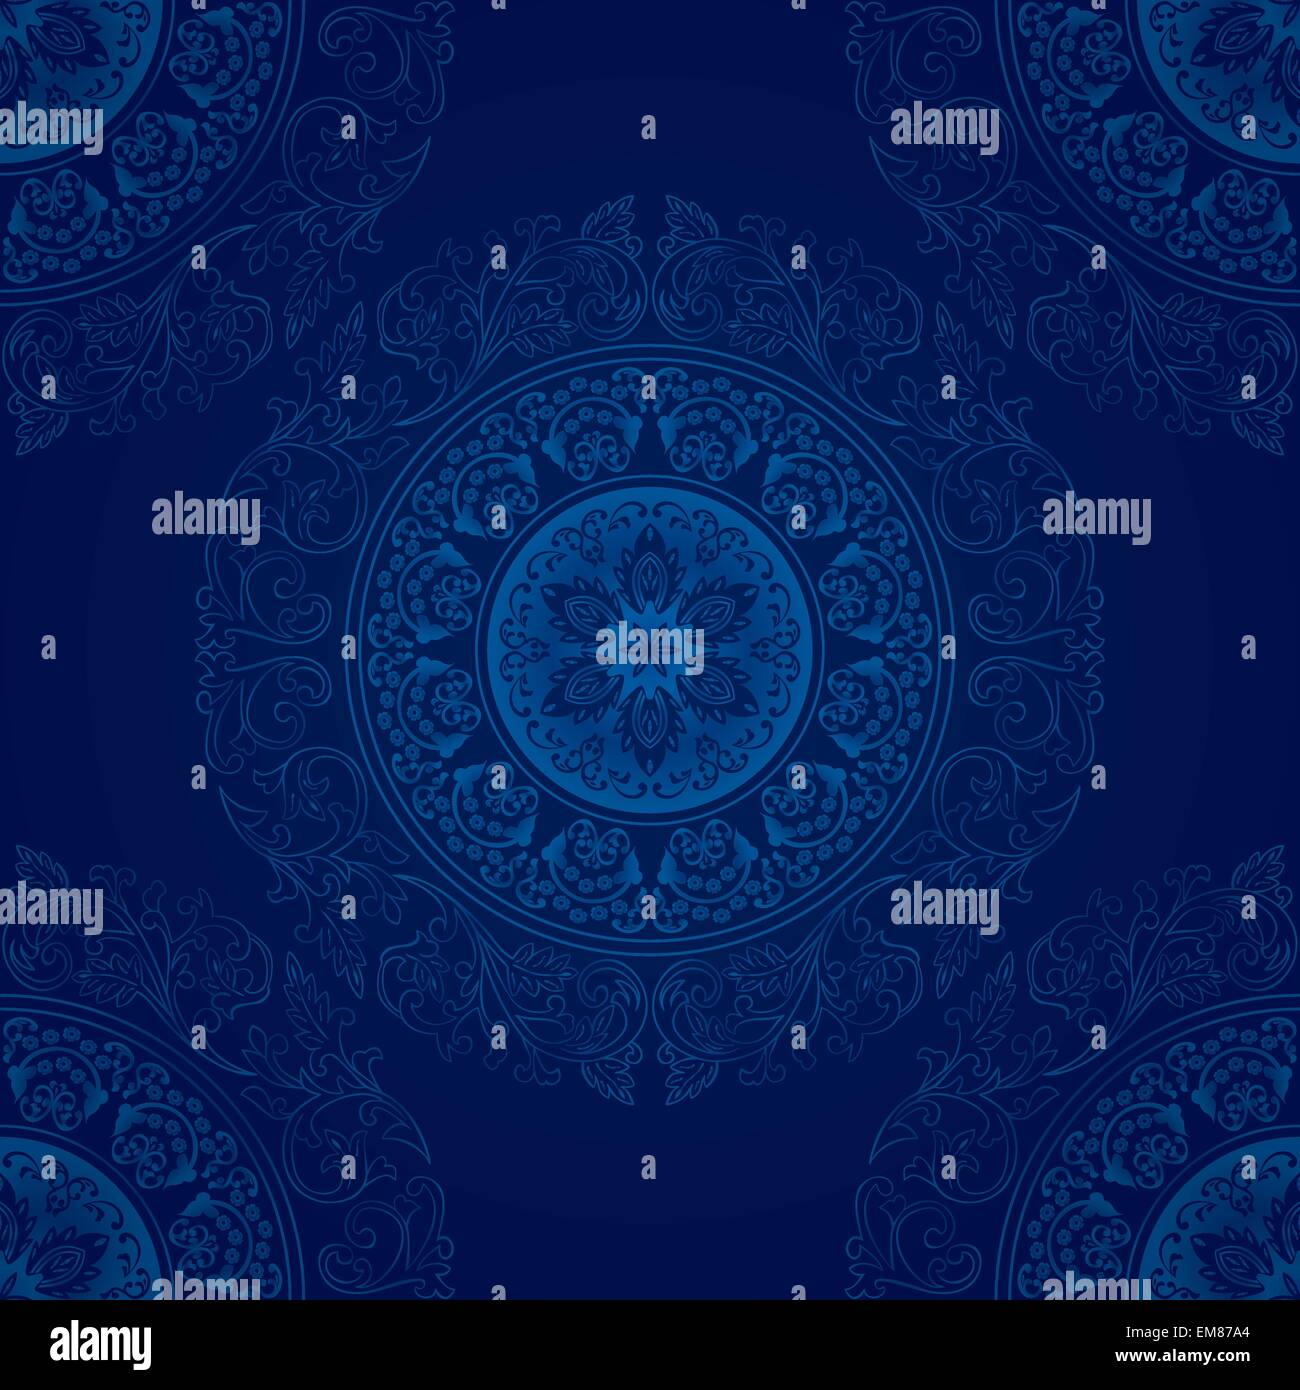 Vintage seamless pattern on blue background Stock Vector